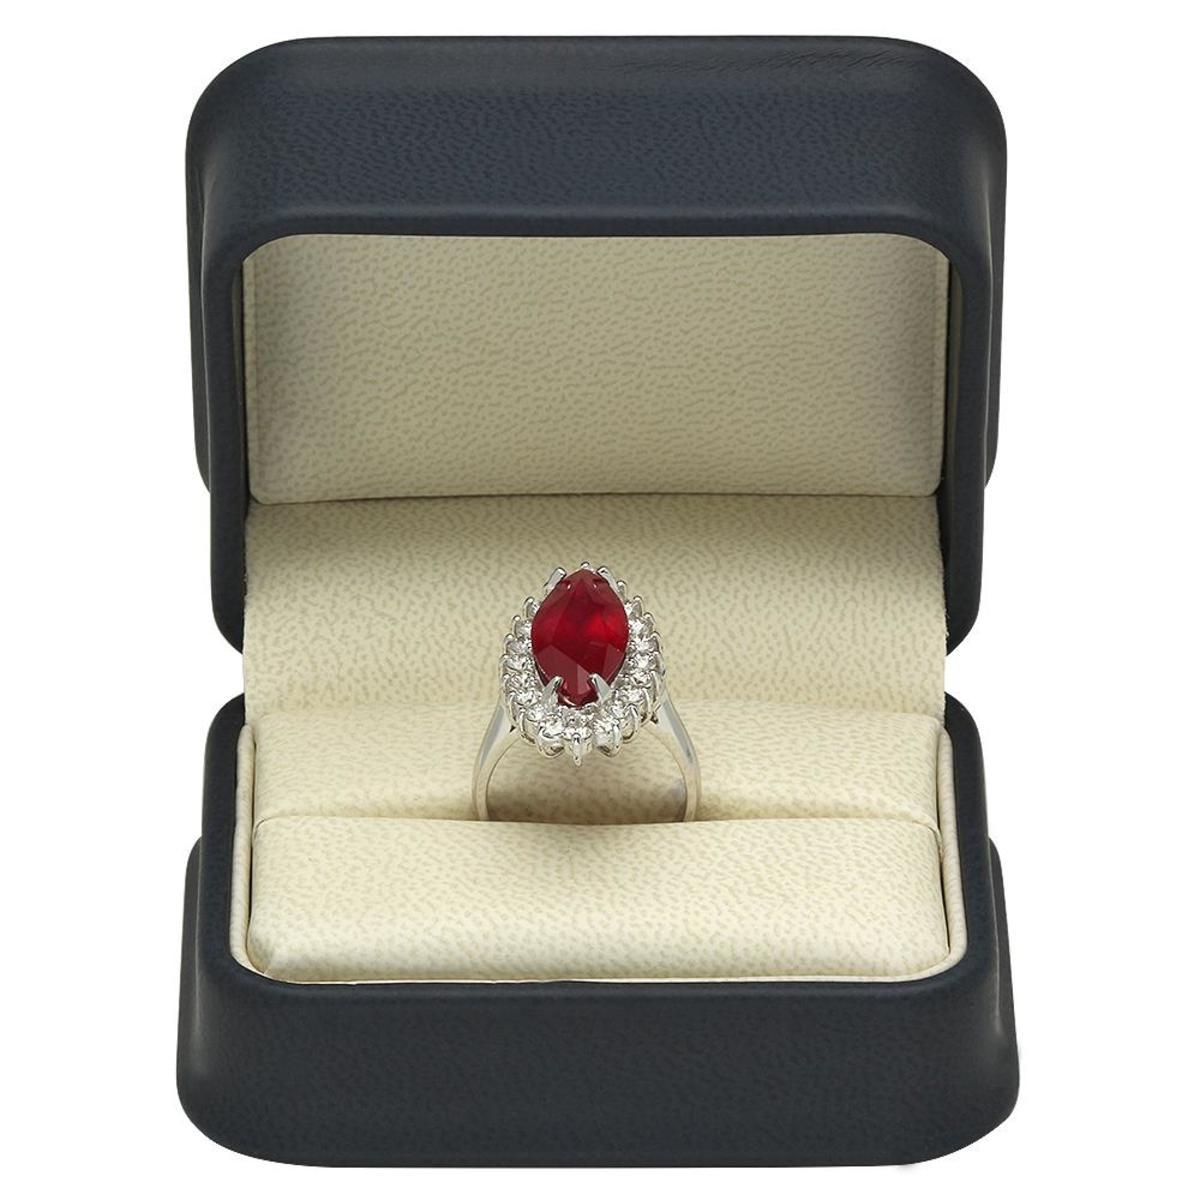 14K White Gold 8.31ct Ruby and 1.47ct Diamond Ring